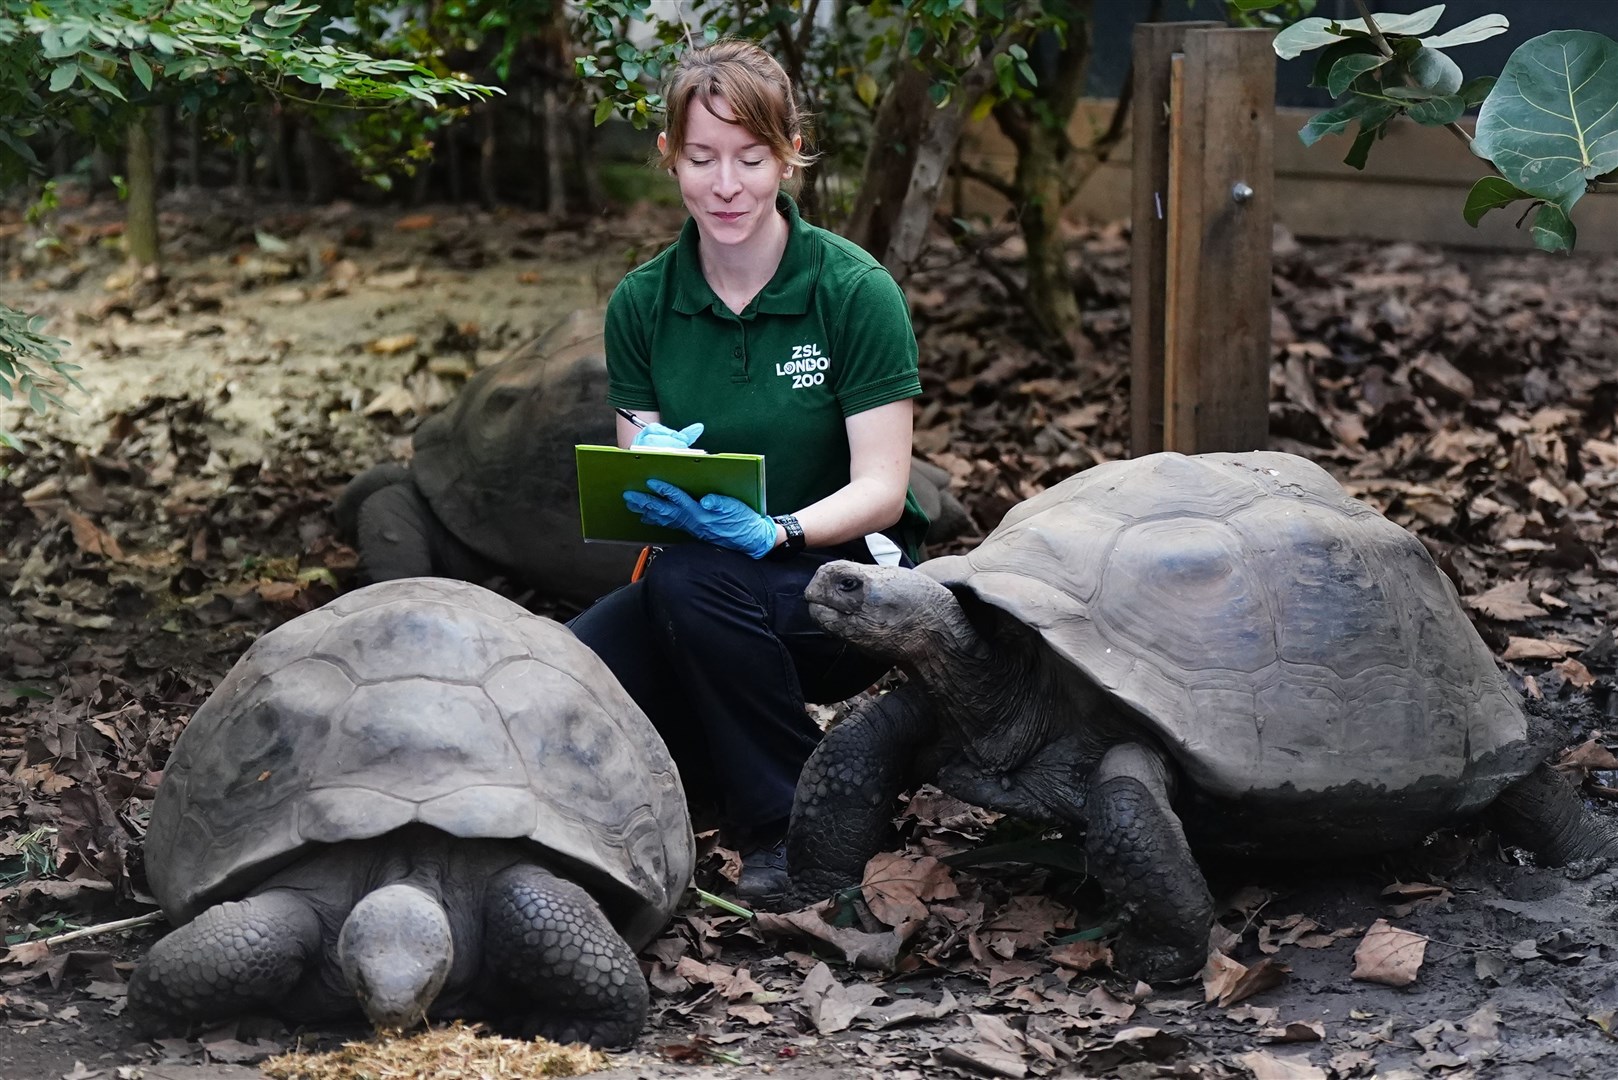 Zoo keeper Kim counts Priscilla and Polly, giant Galapagos Tortoises, during the annual stocktake at ZSL London Zoo (Aaron Chown/PA)